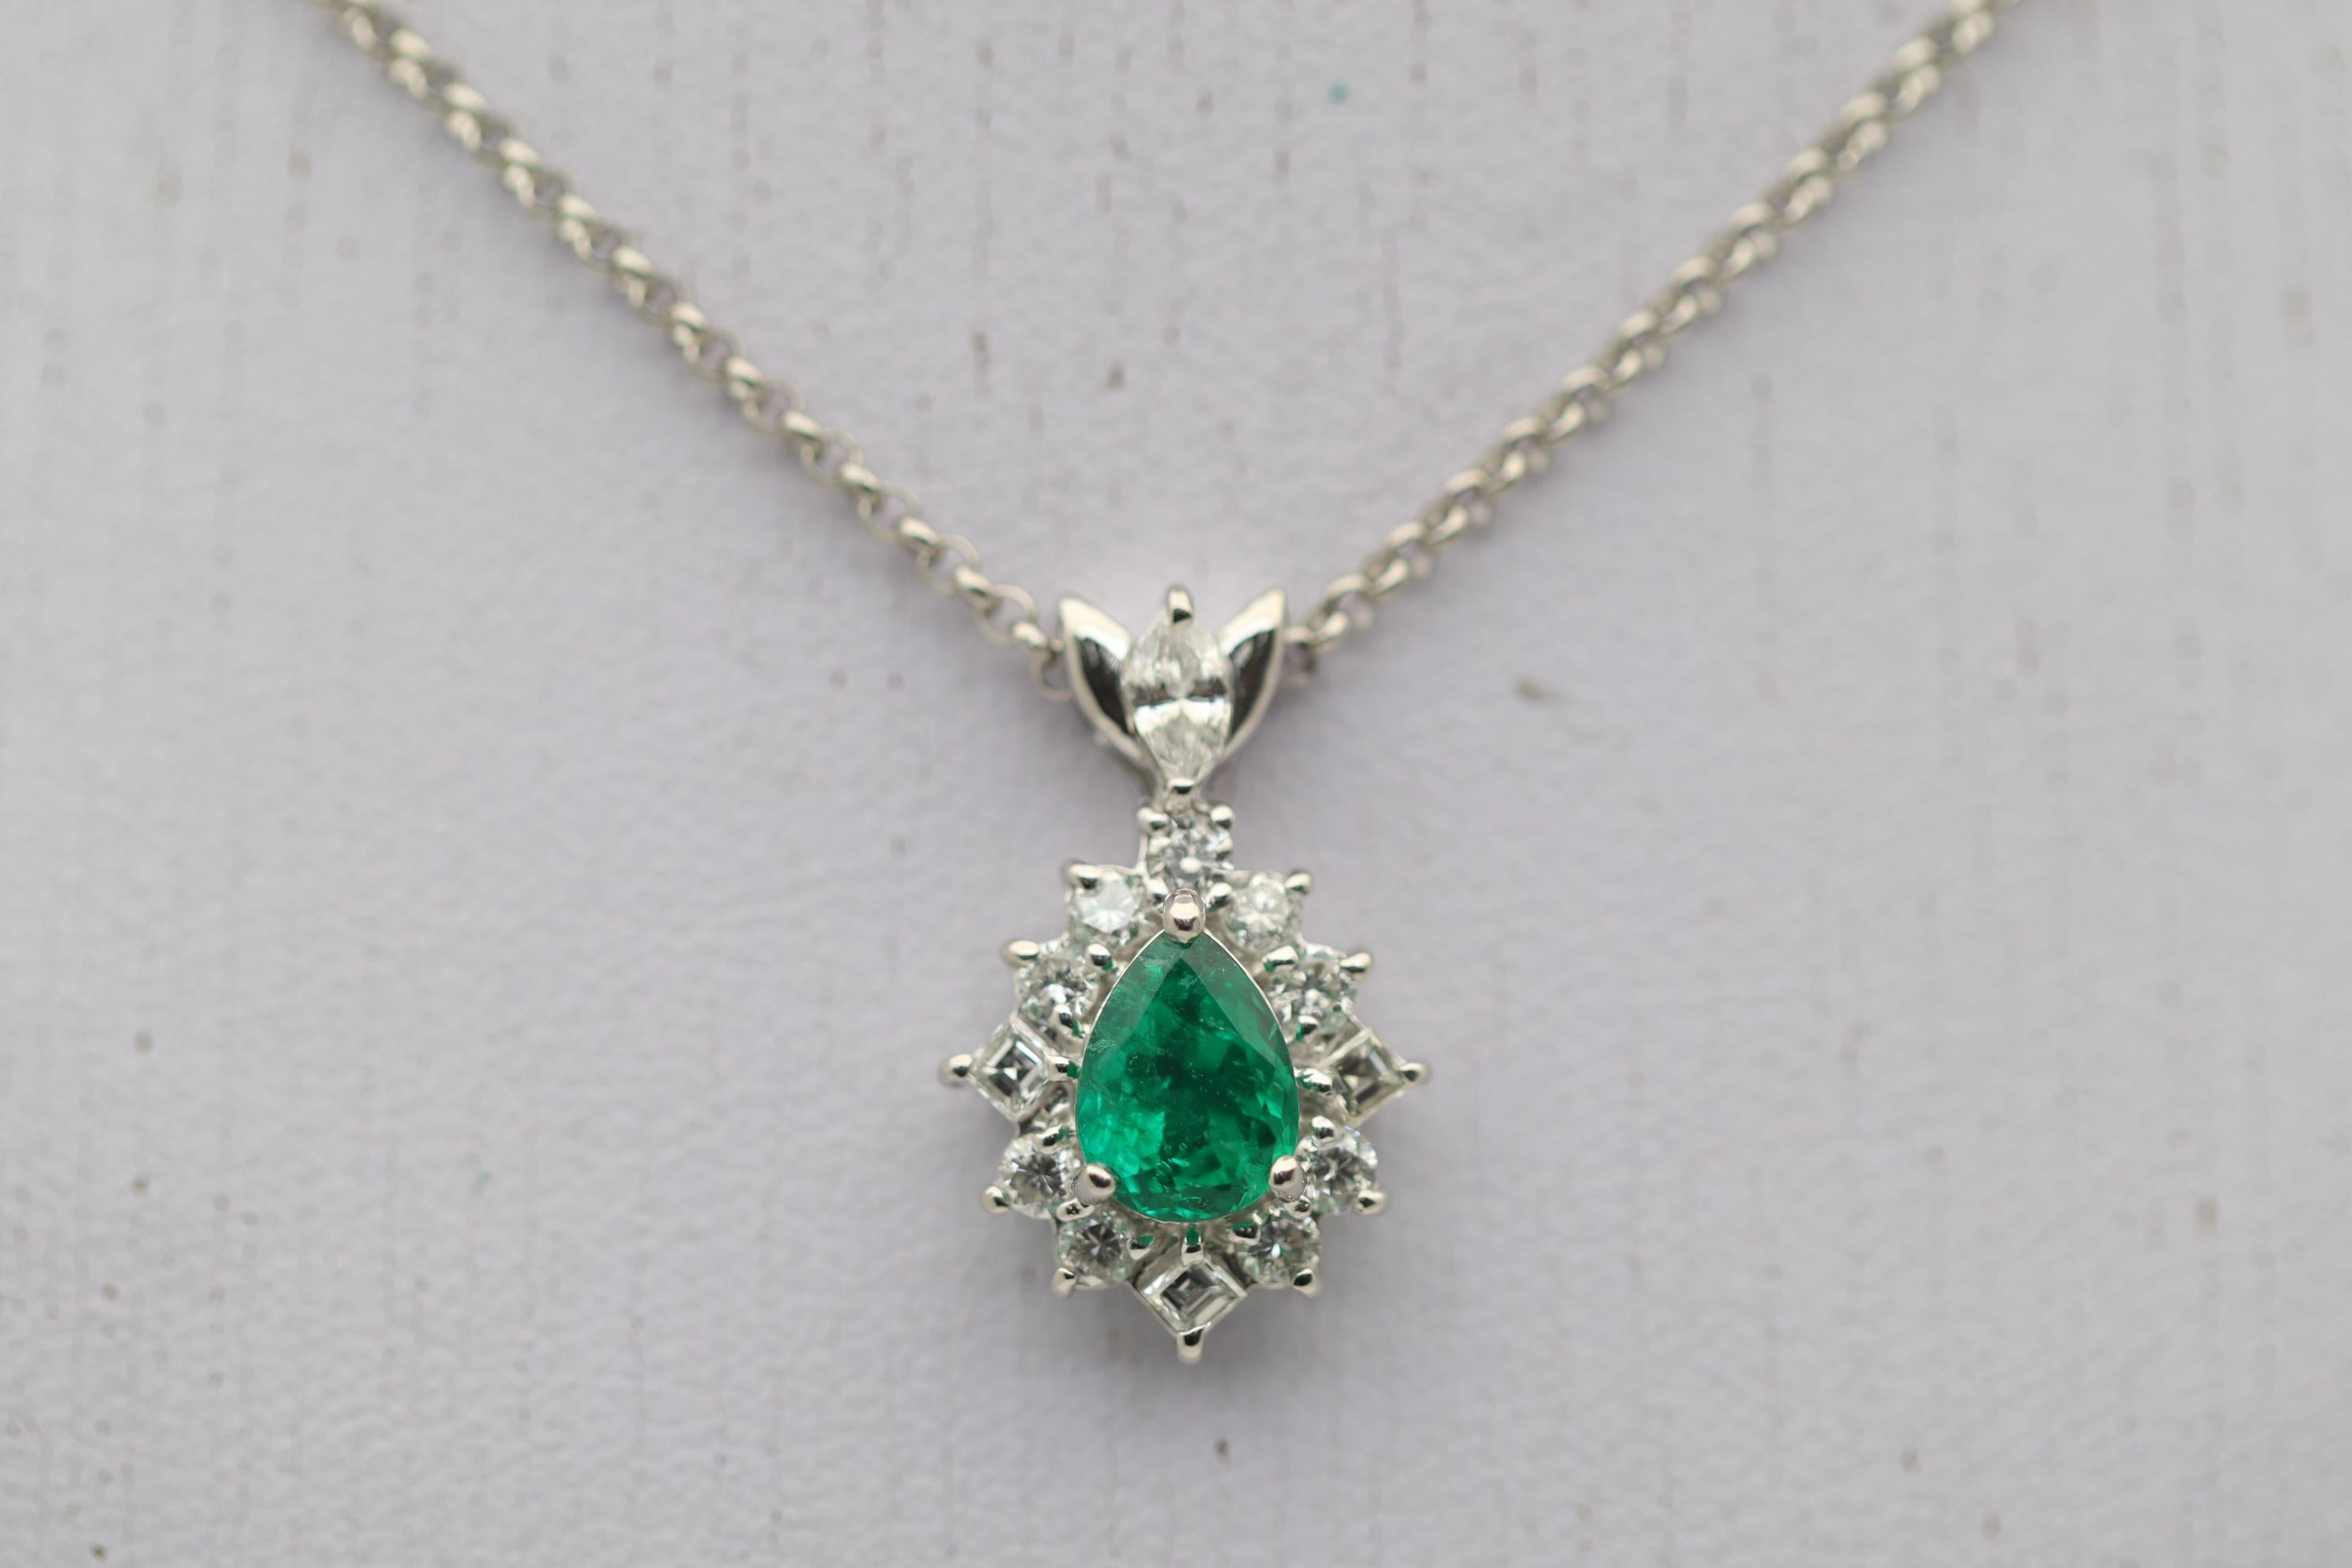 A very fine quality emerald takes center stage of this platinum made pendant. The emerald weighs 1.11 carats and has a rich vivid green color with excellent brightness and light return. The color is close to the finest an emerald can be. It is